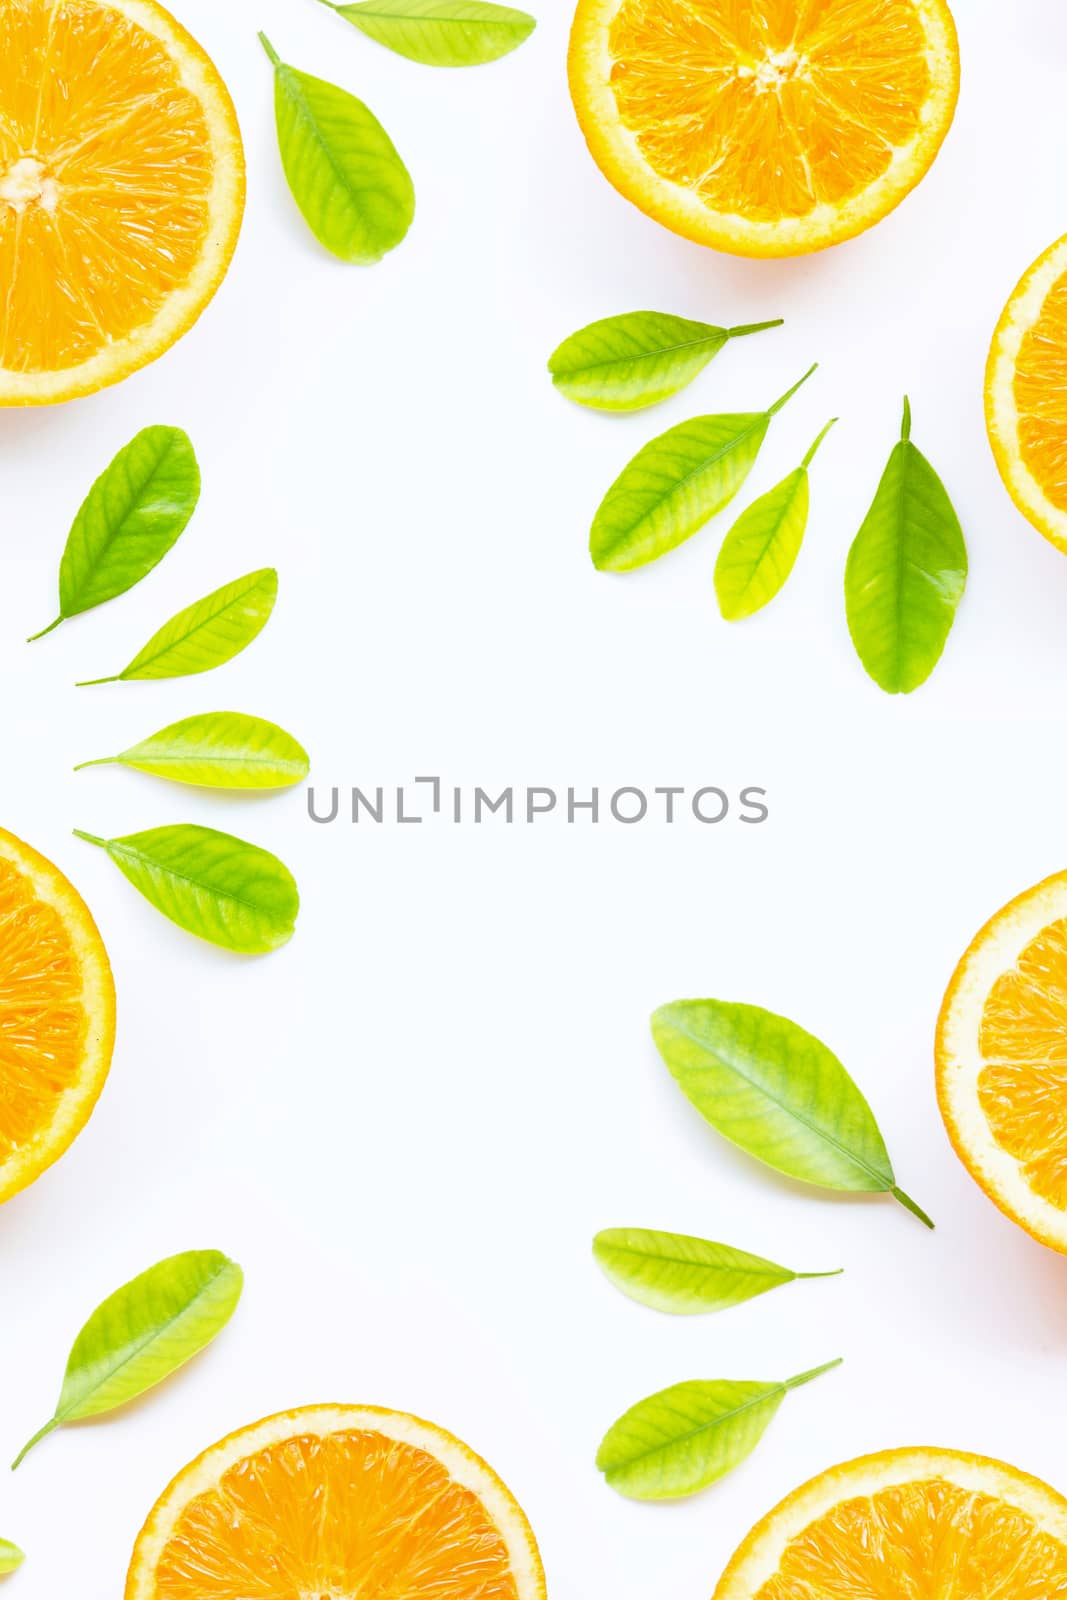 Orange with green leaves isolated on white background. Copy space